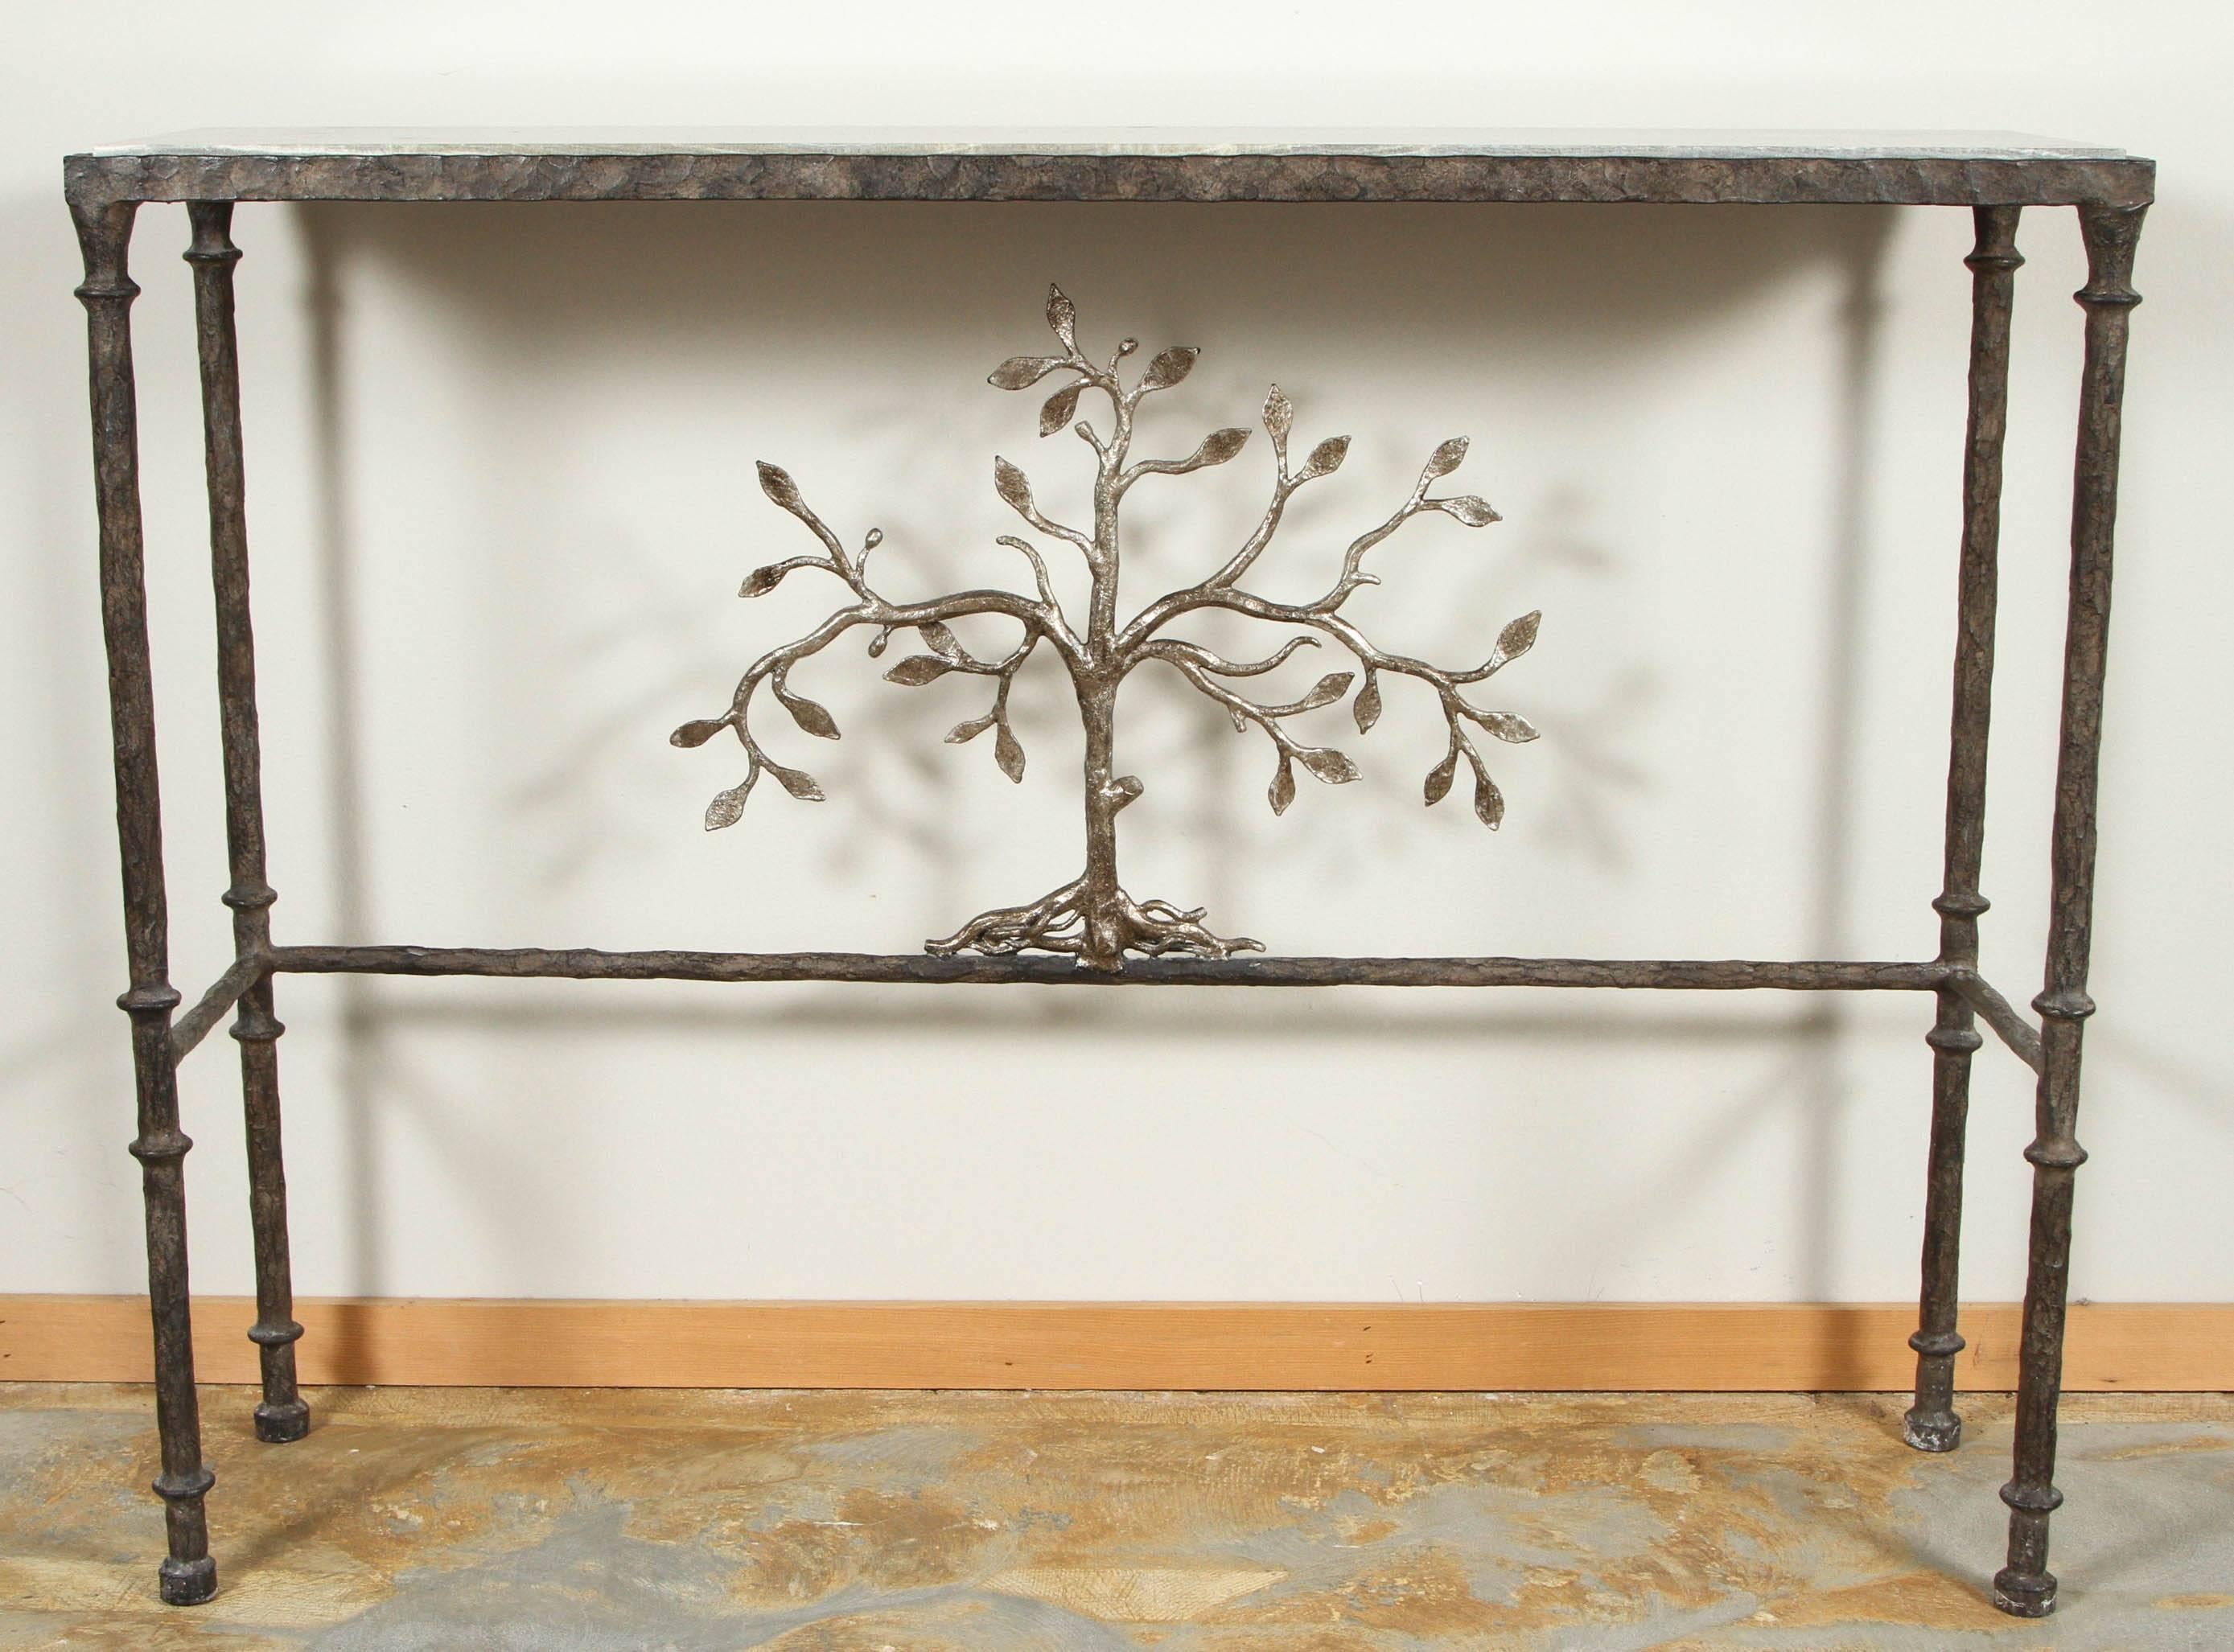 Hand-hammered iron console table after Diego Giacometti, with silver limestone top, the tree is genuine silver over iron.